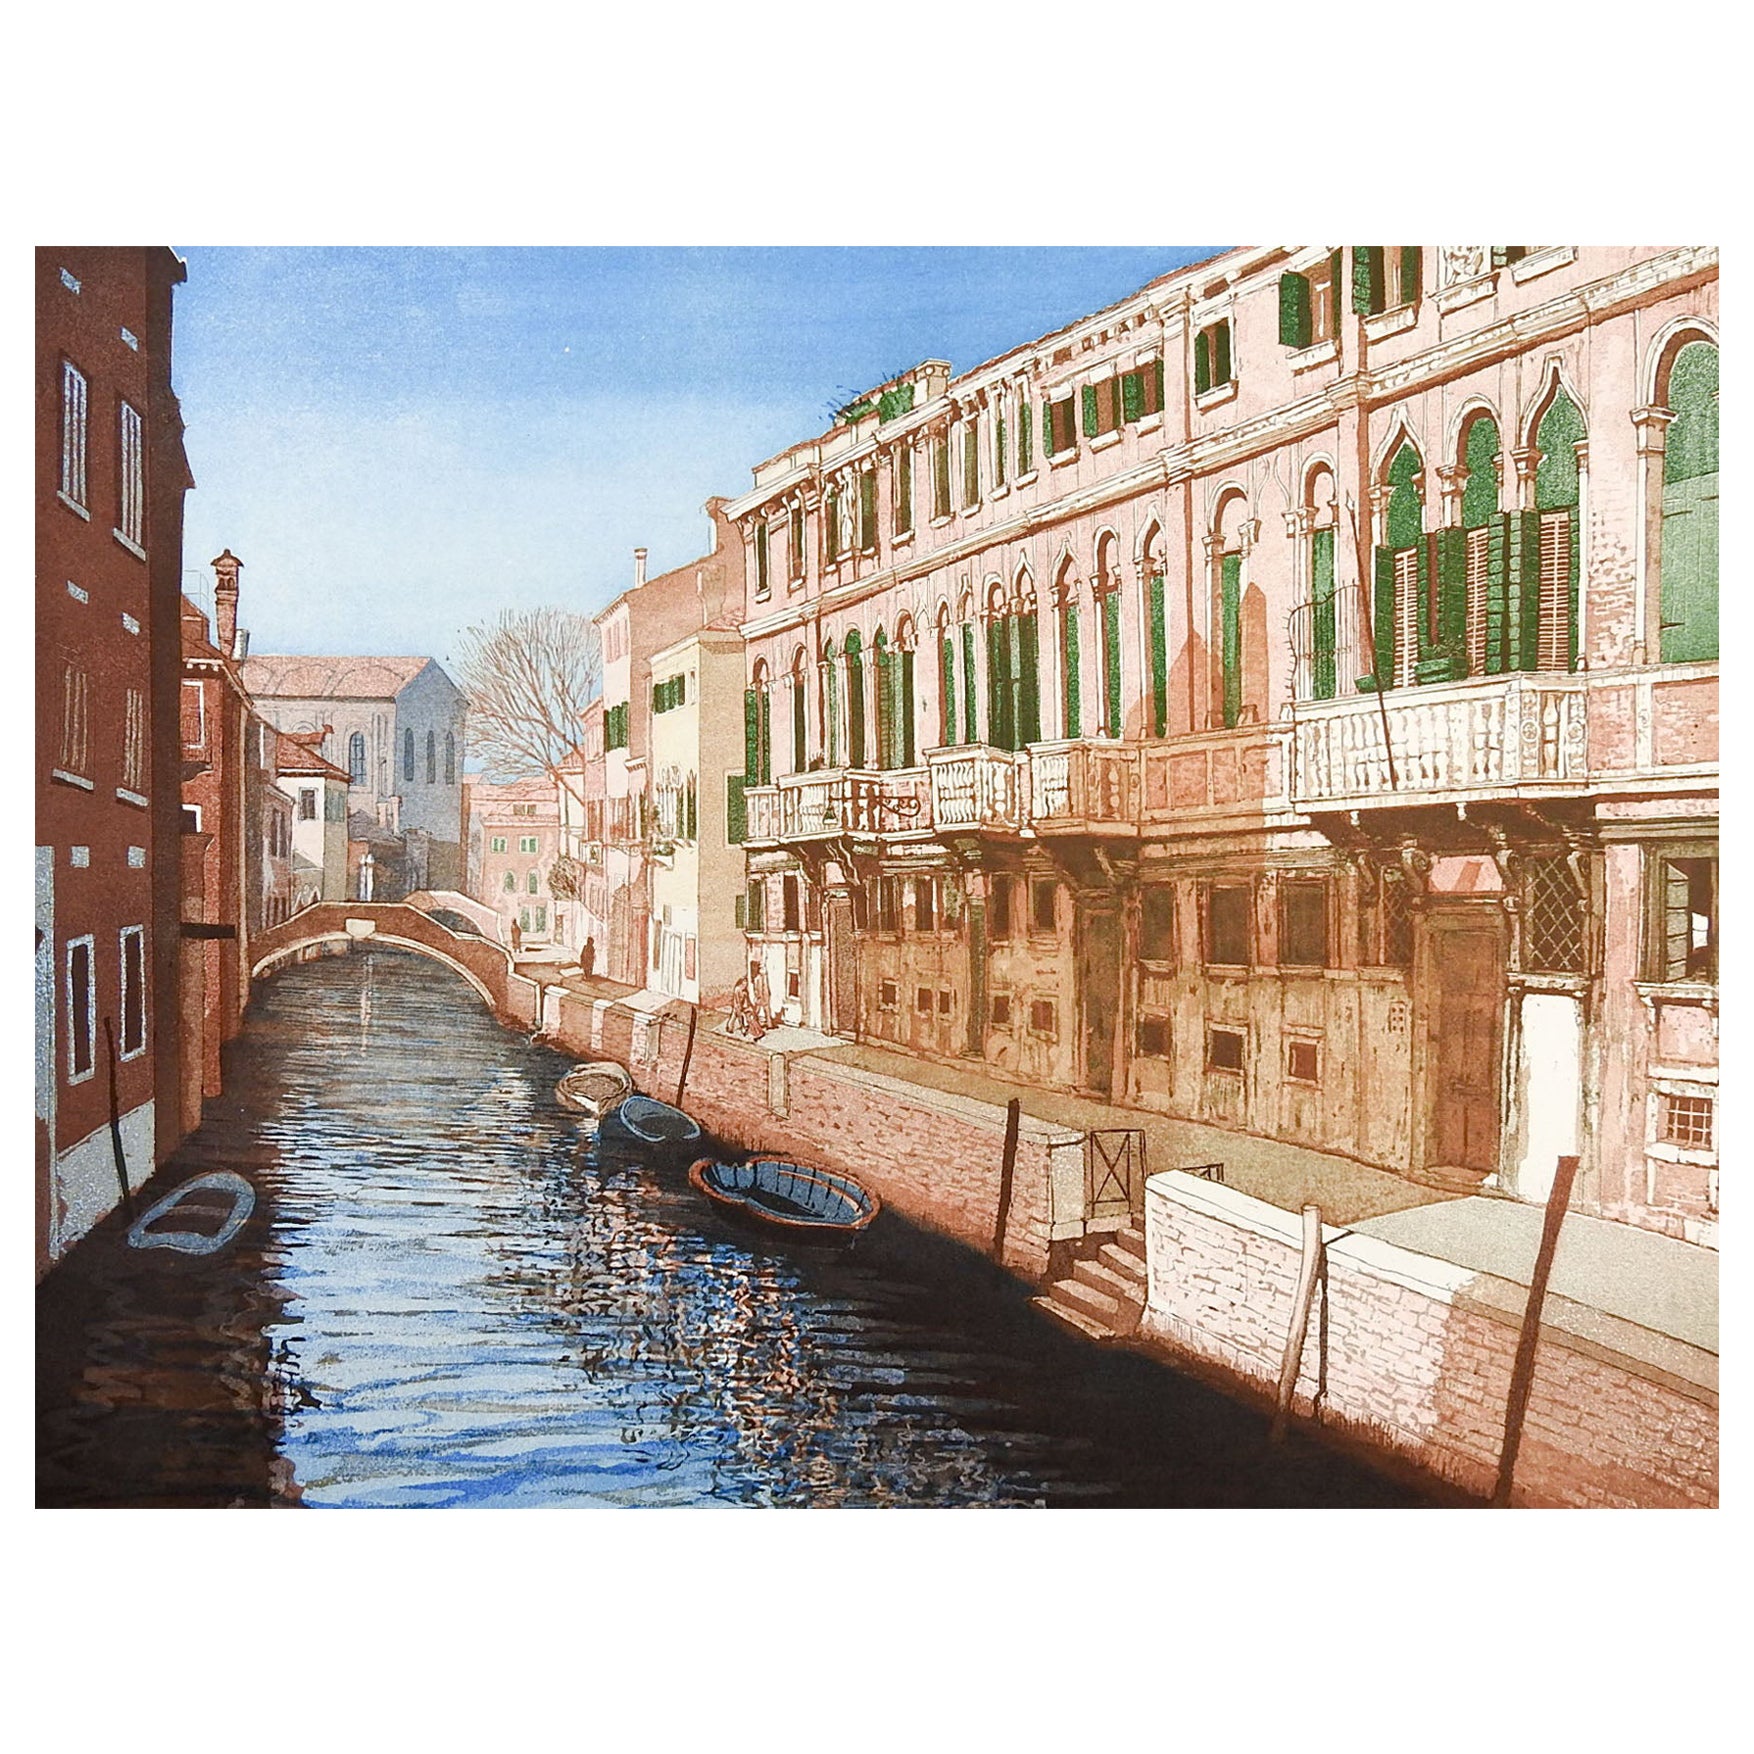 Fondamenta Zen Canal Venice Italy Etching For Sale